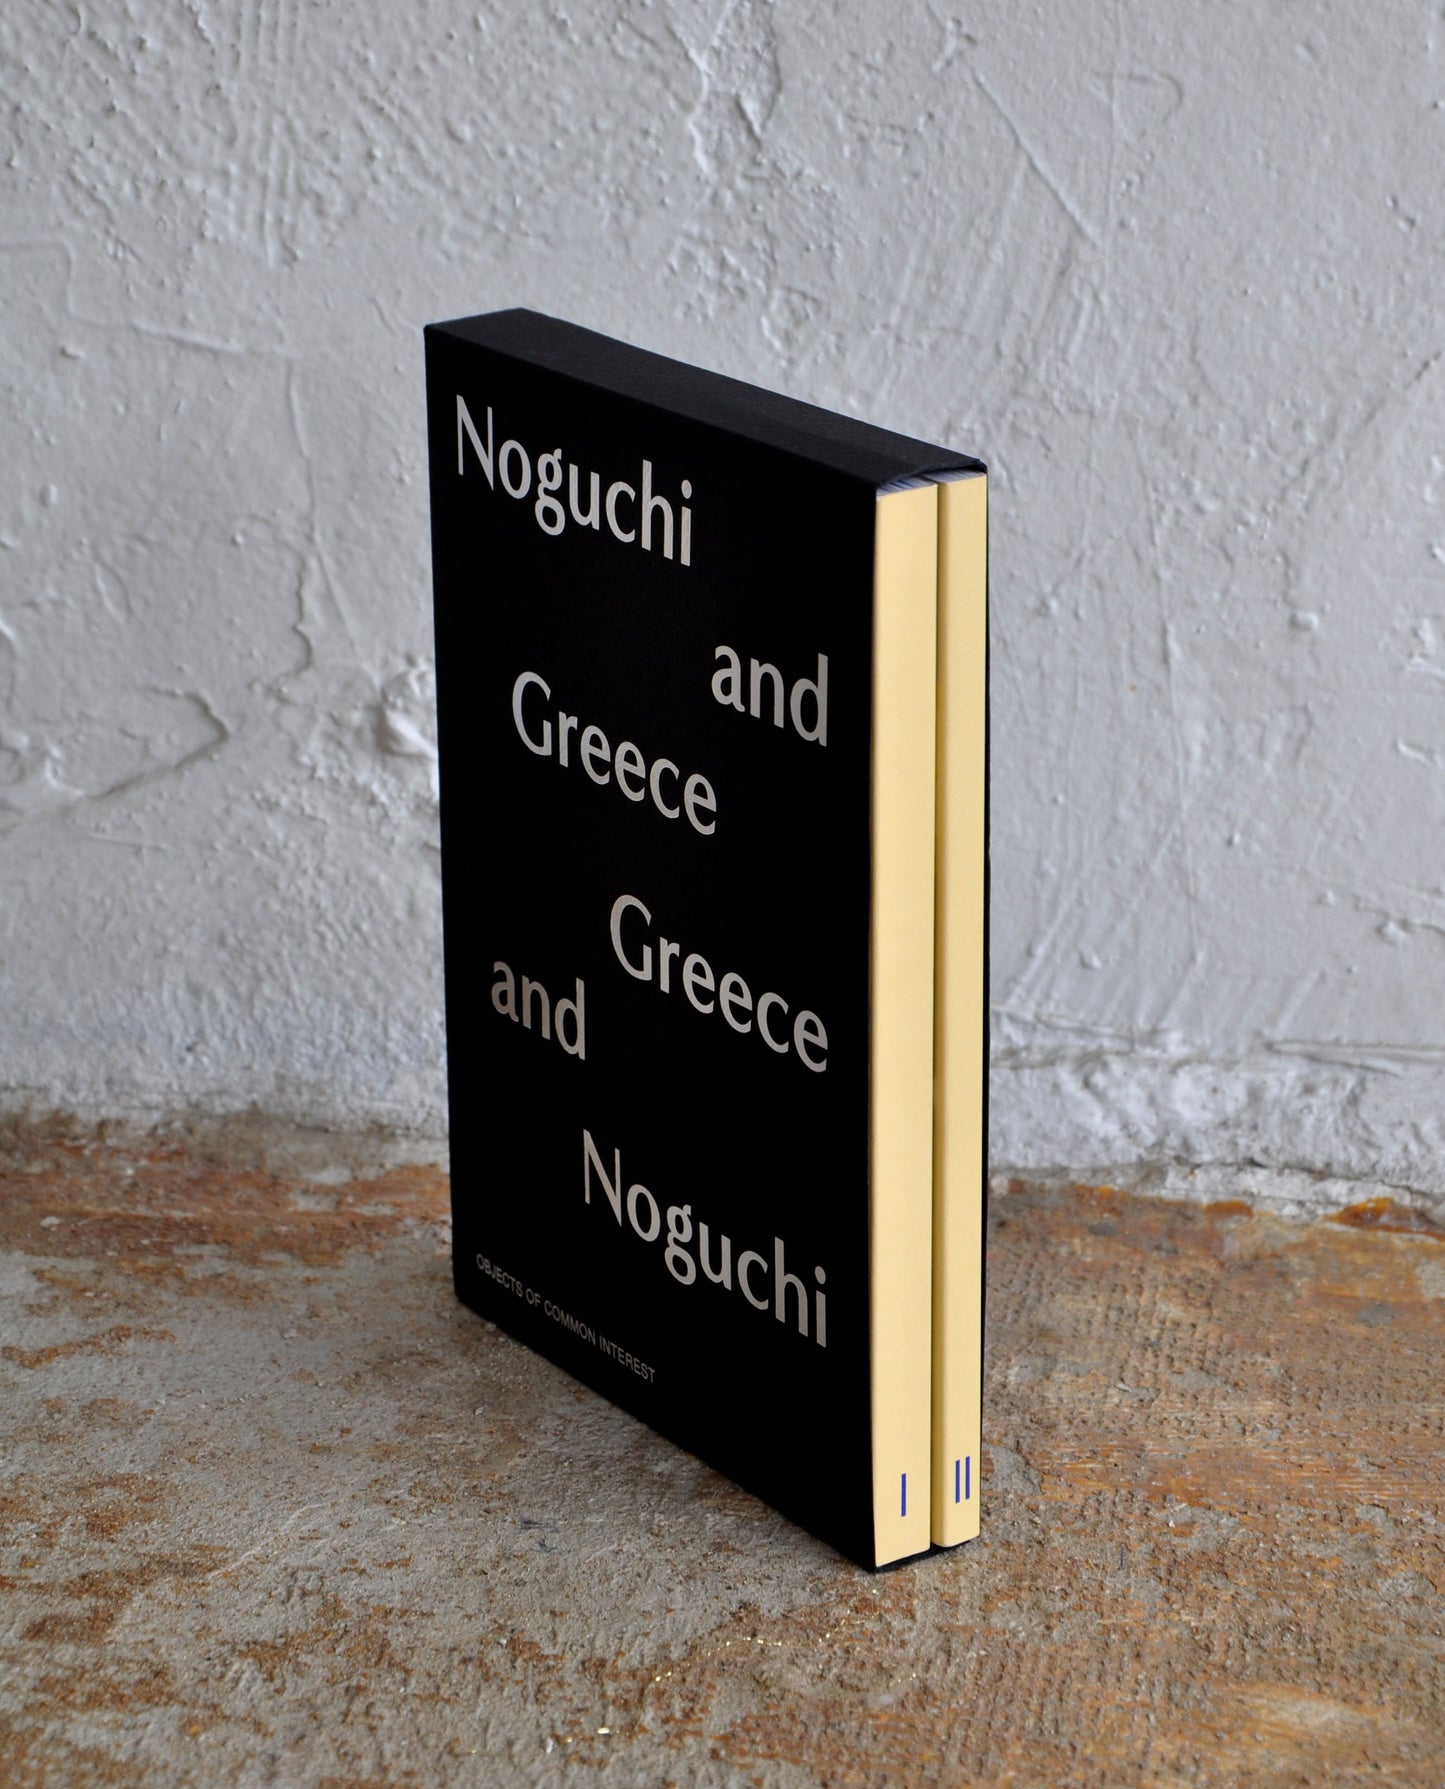 Noguchi and Greece, Greece and Noguchi: Objects of Common Interest